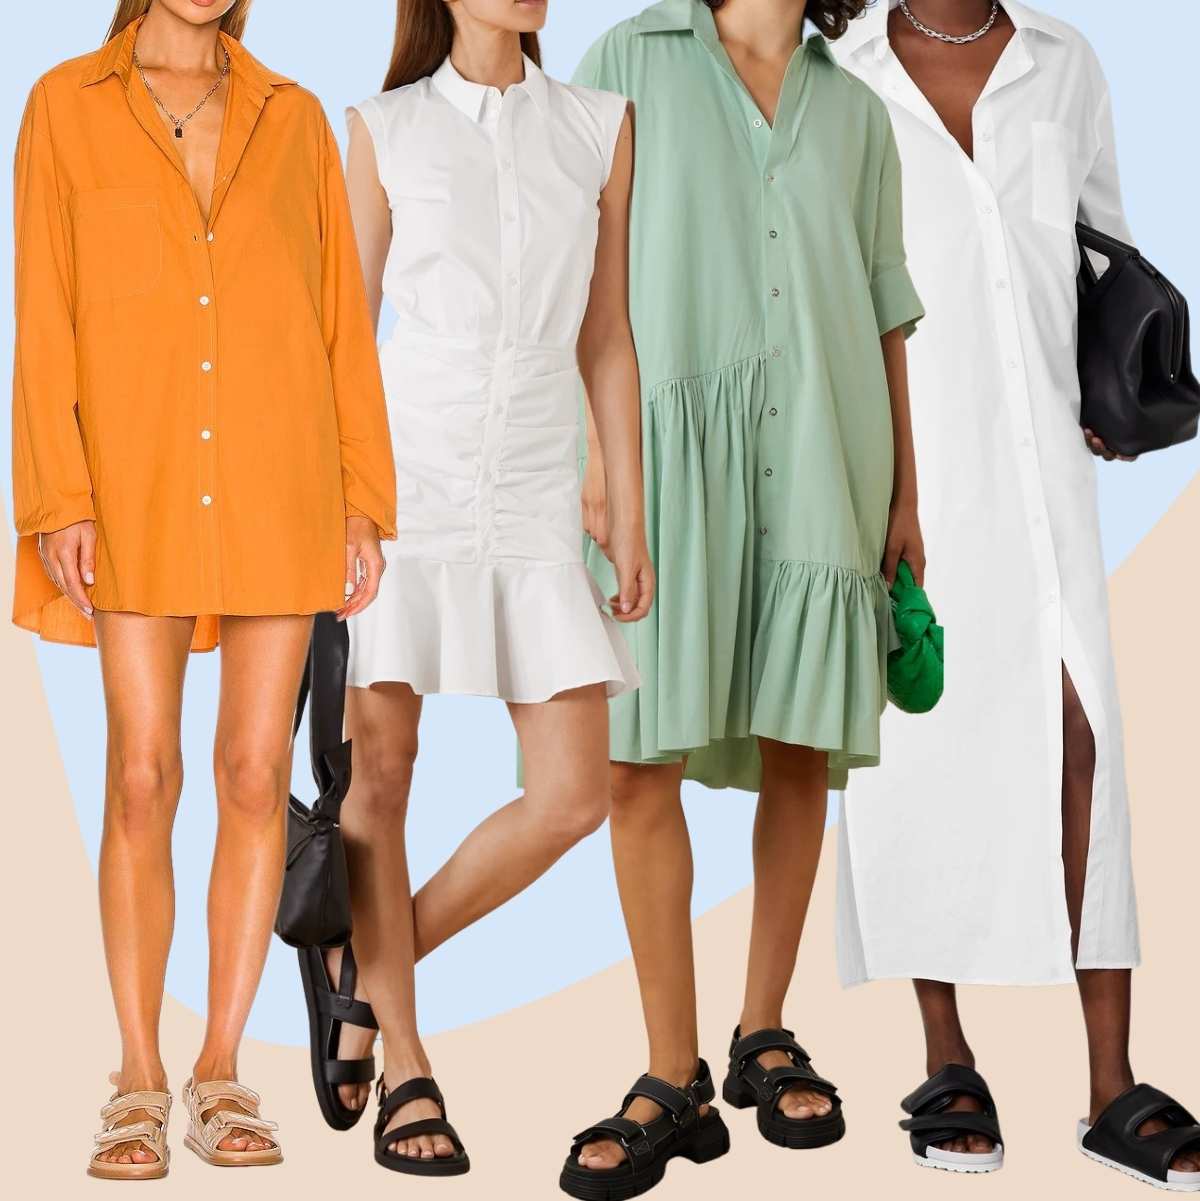 Collage of 4 women wearing different sporty sandals with a shirt dress.